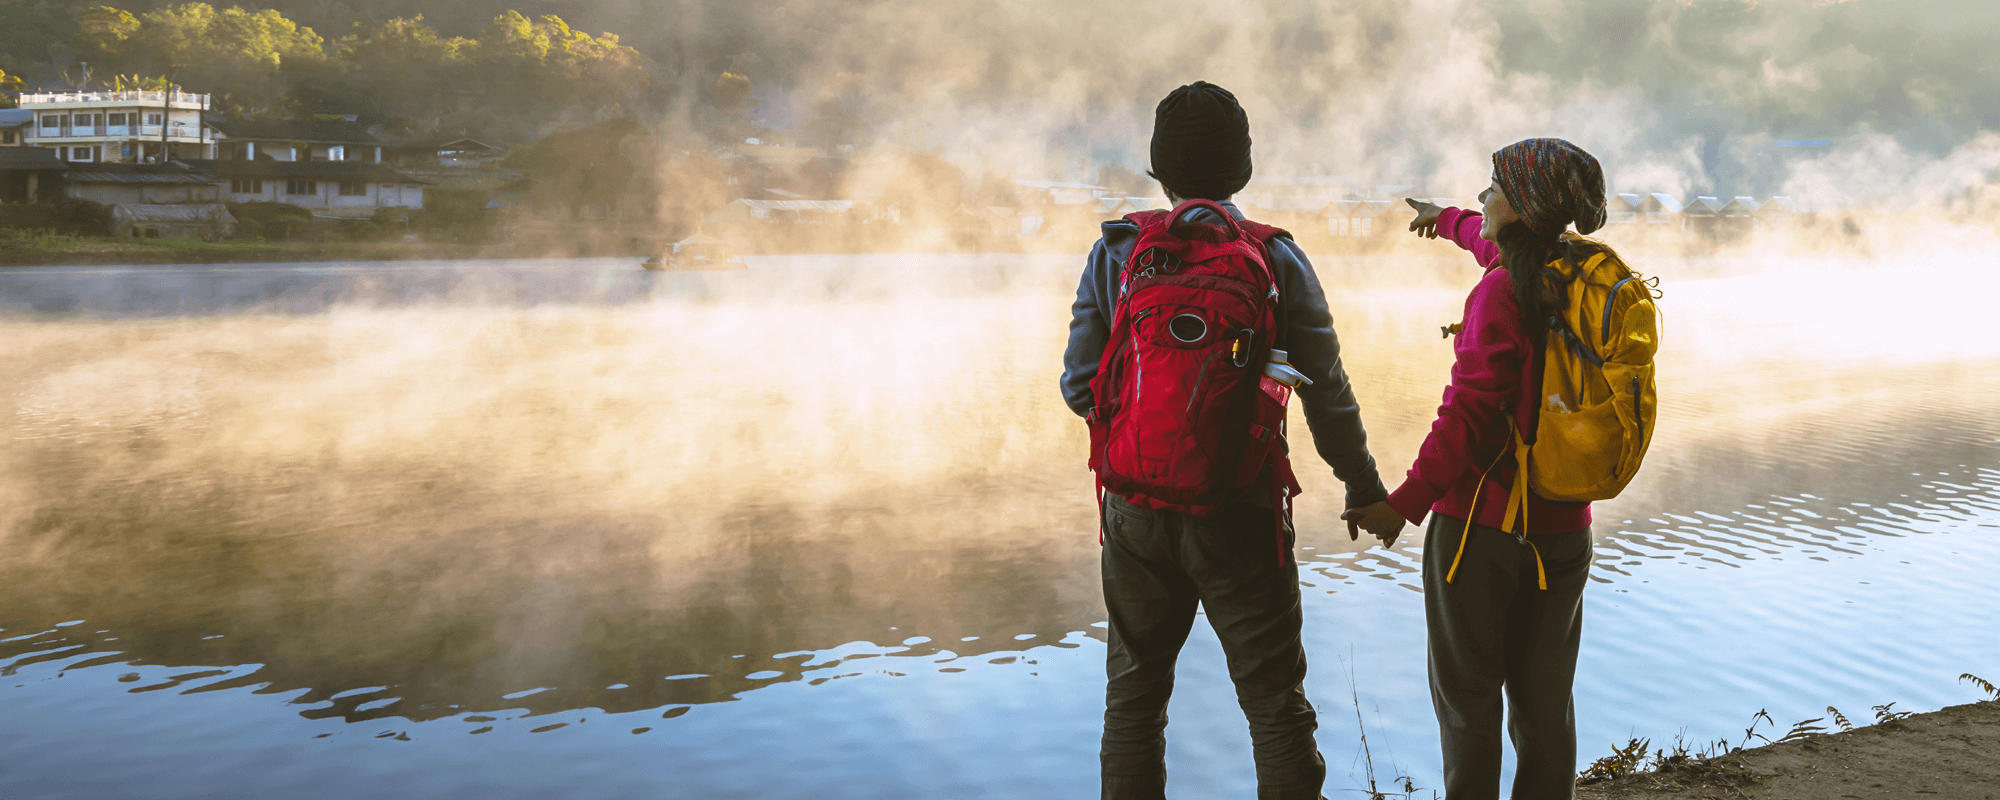 Sweet Backpacks | wherever life takes you we have a backpack for you